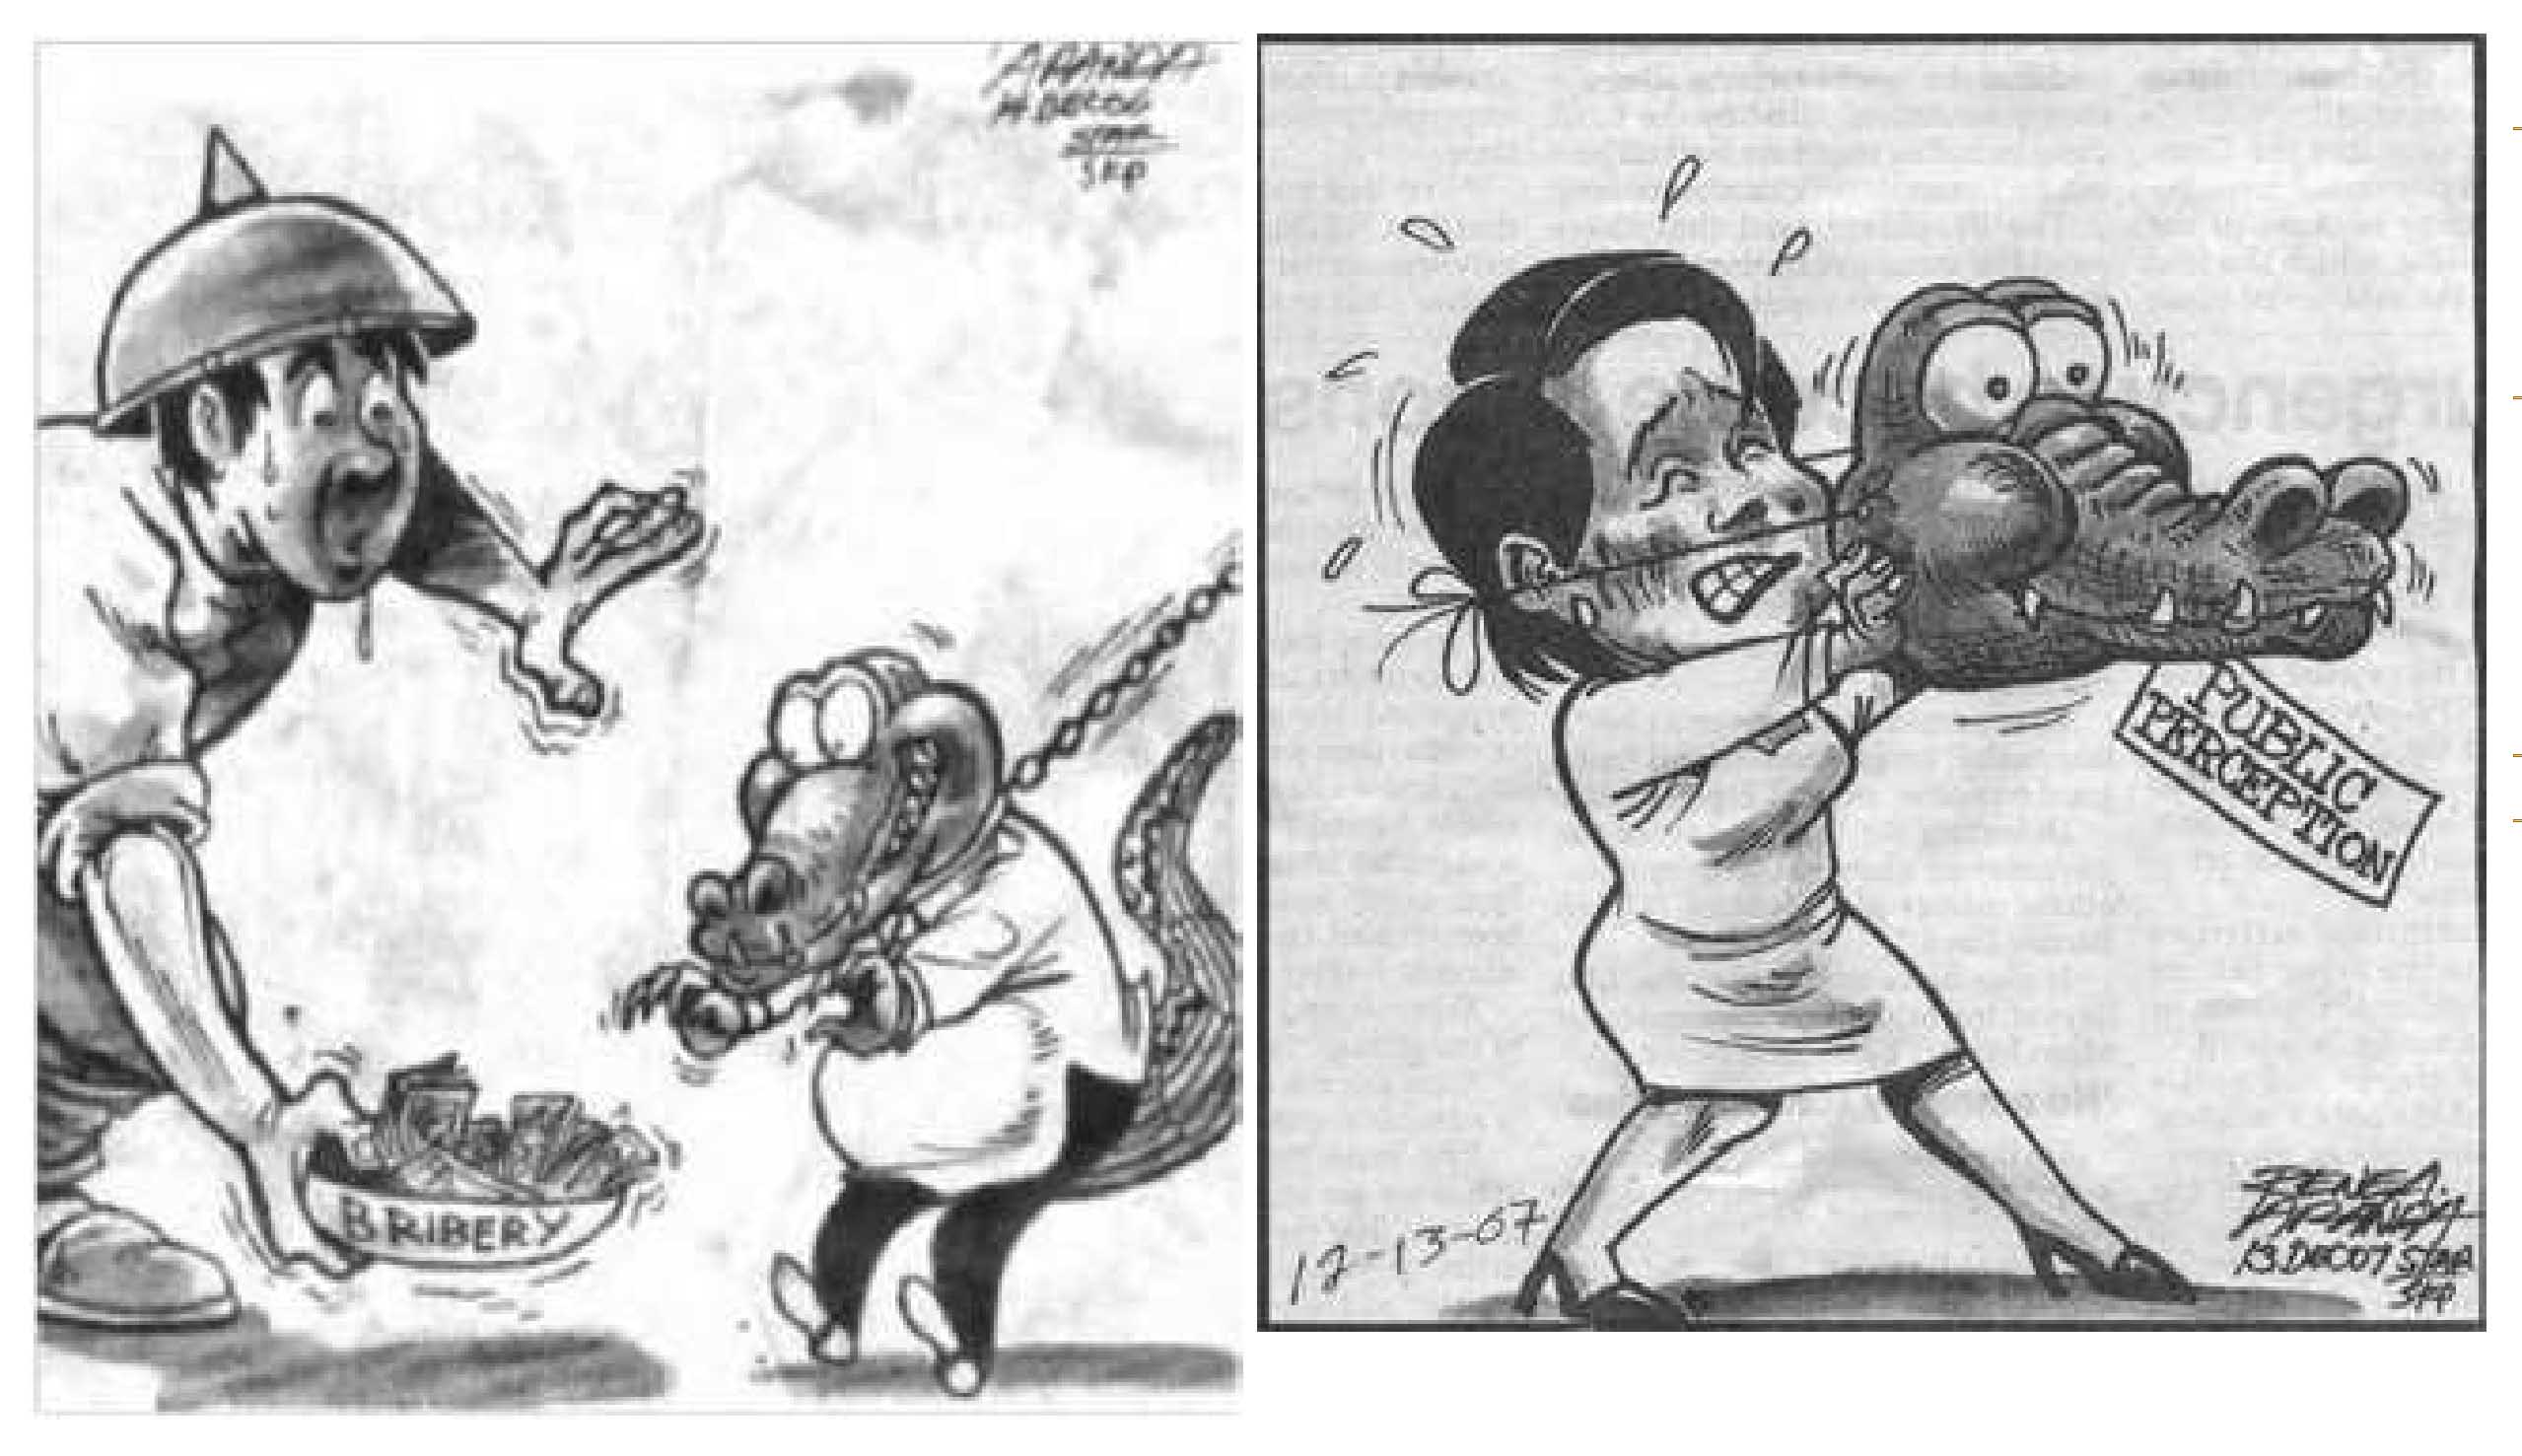 Two black and white cartoons from newspapers featuring crocodiles as greedy/corrupt politicians